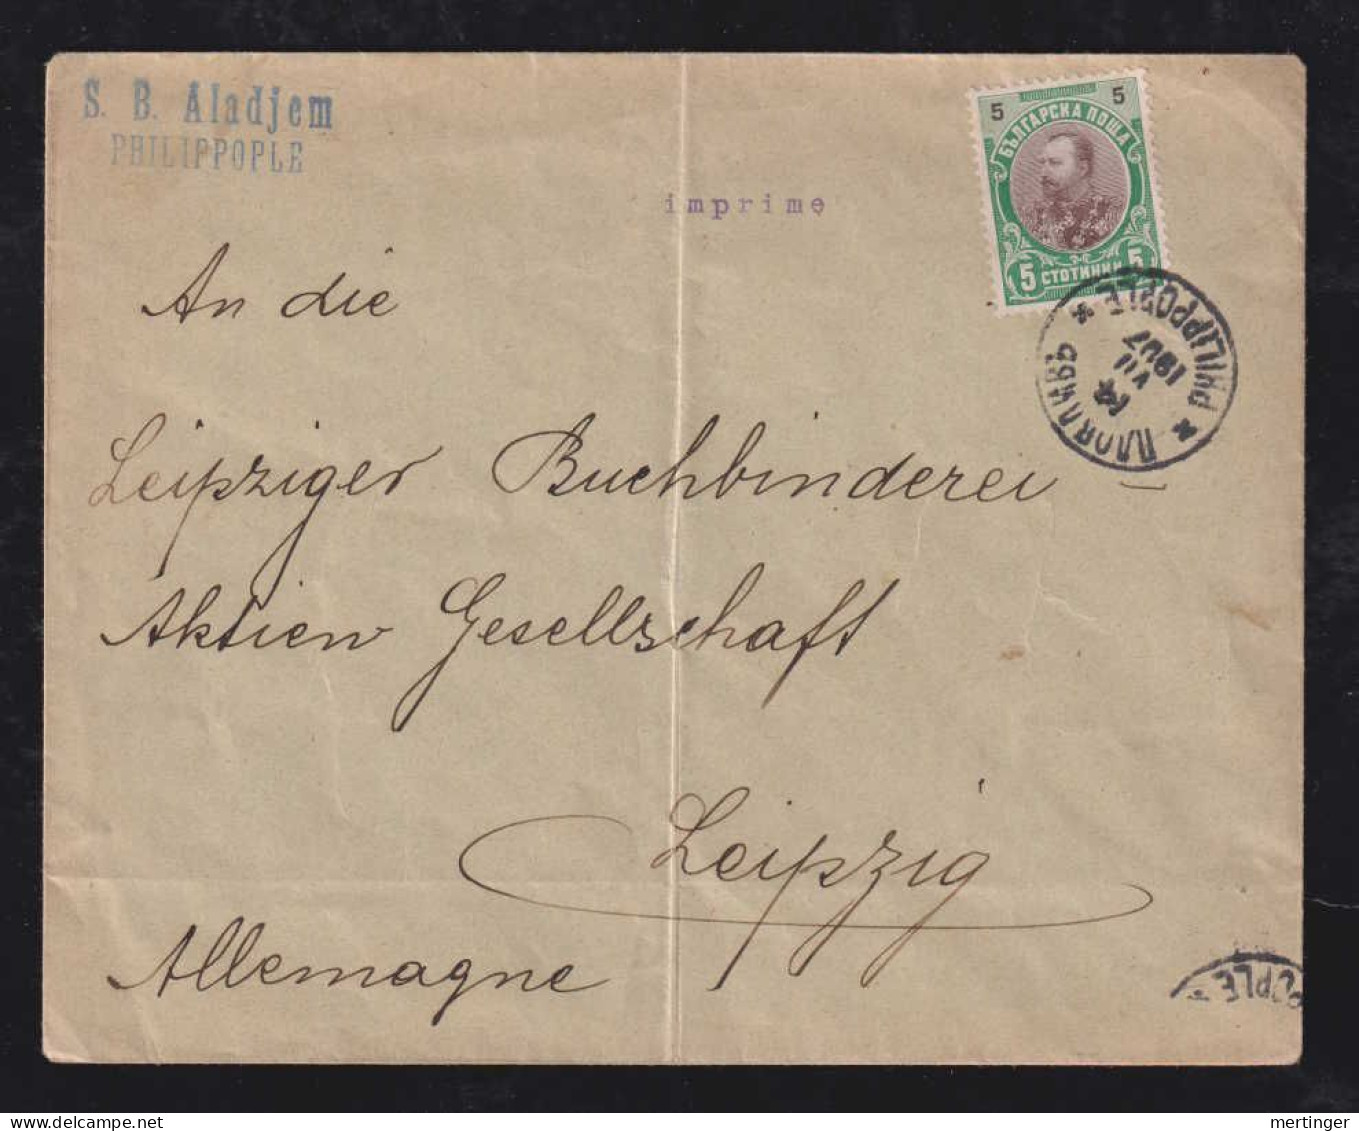 Bulgaria 1907 Printed Matter PHILIPPOPLE X LEIPZIG Germany - Covers & Documents